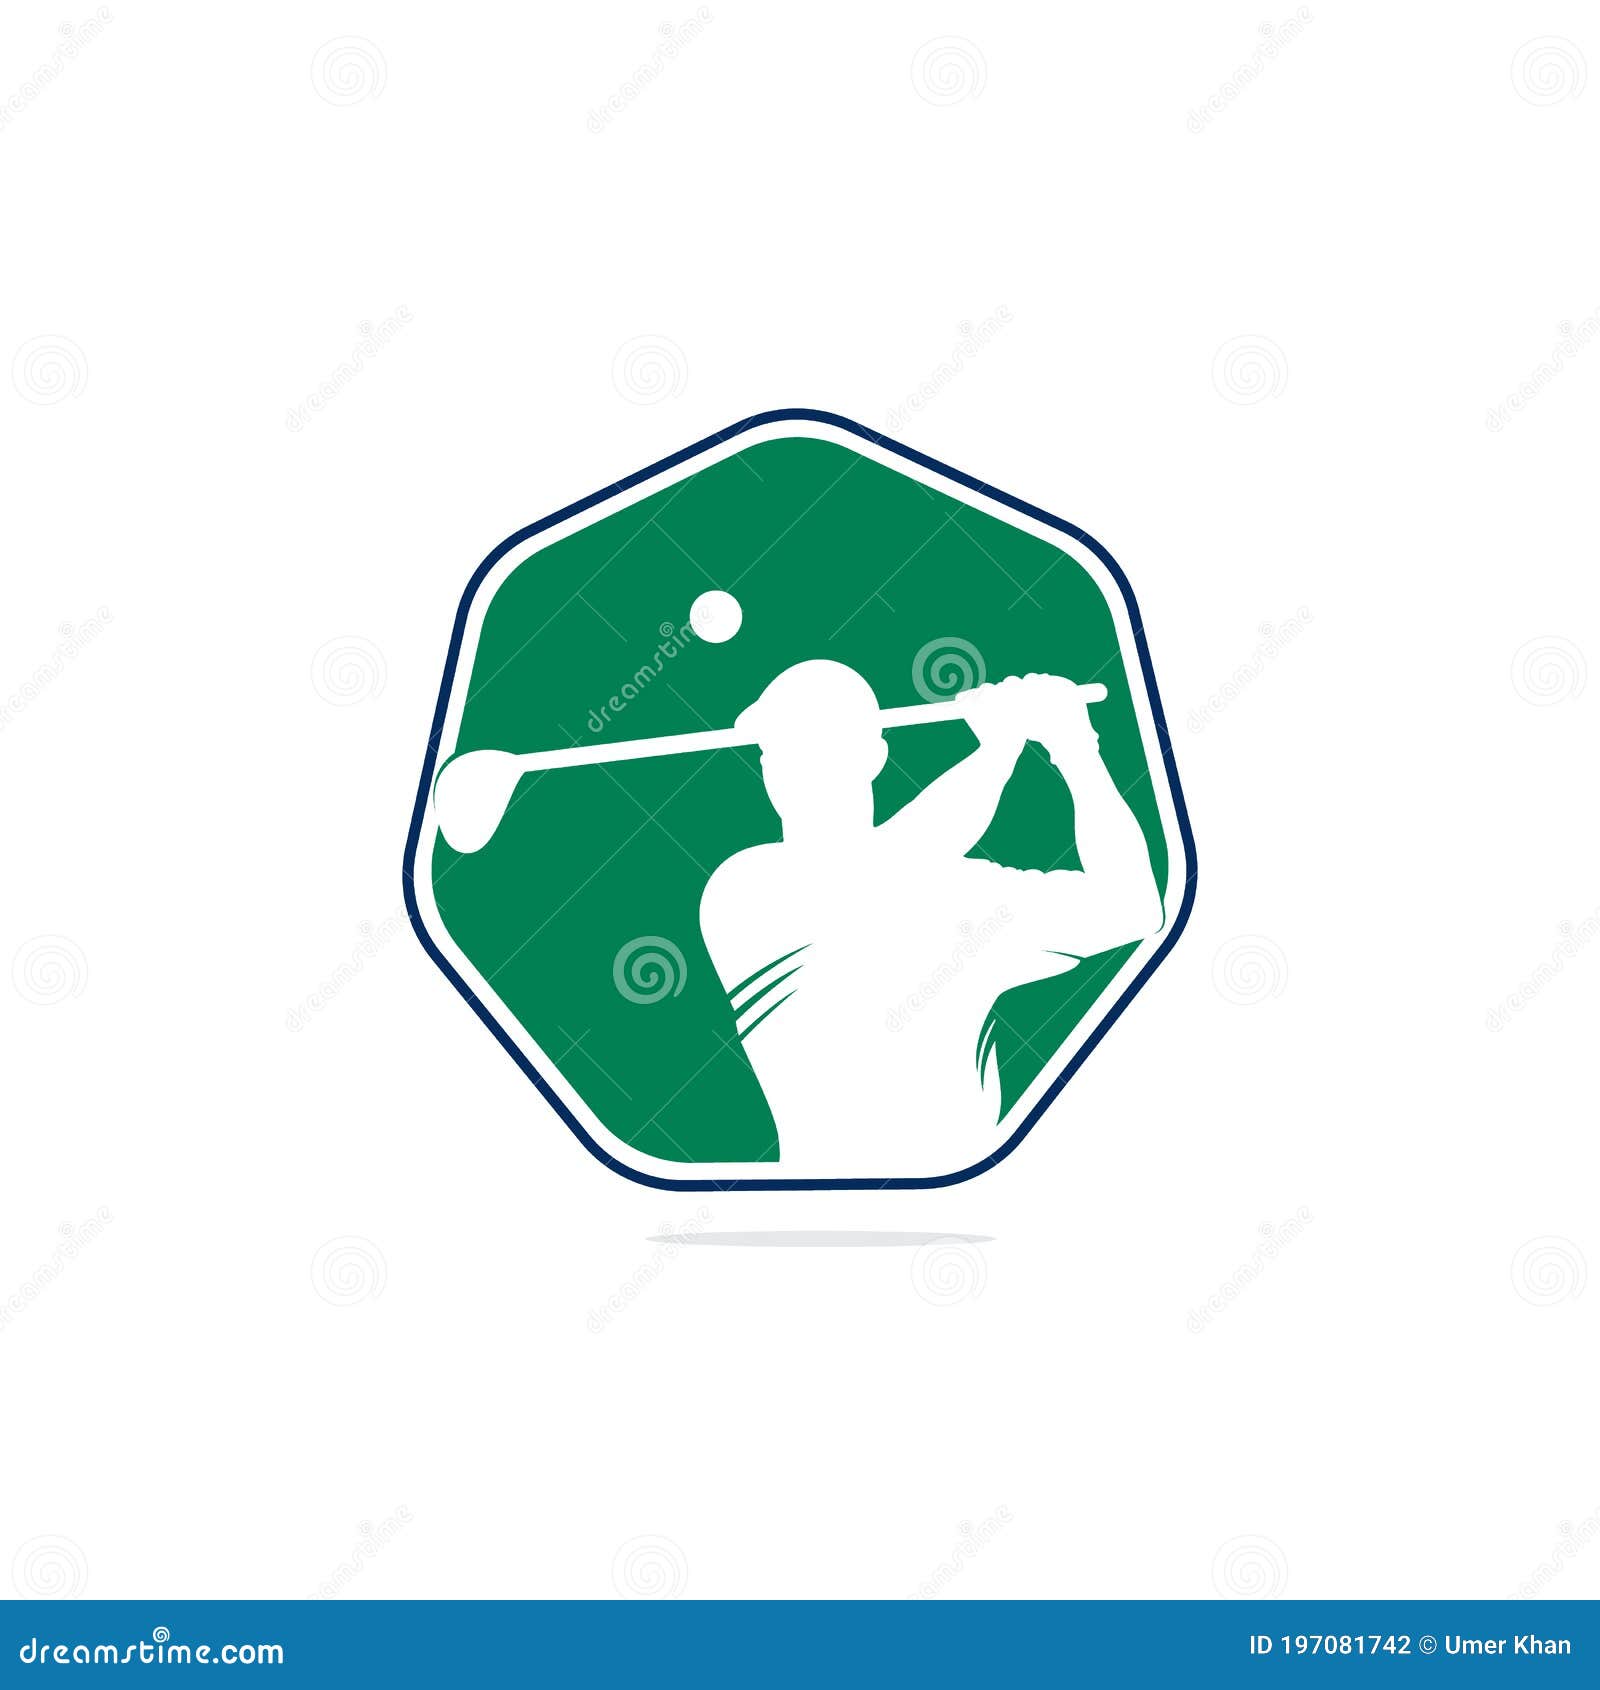 Golf Logo Abstract Swing and Hit the Ball Stock Vector - Illustration ...